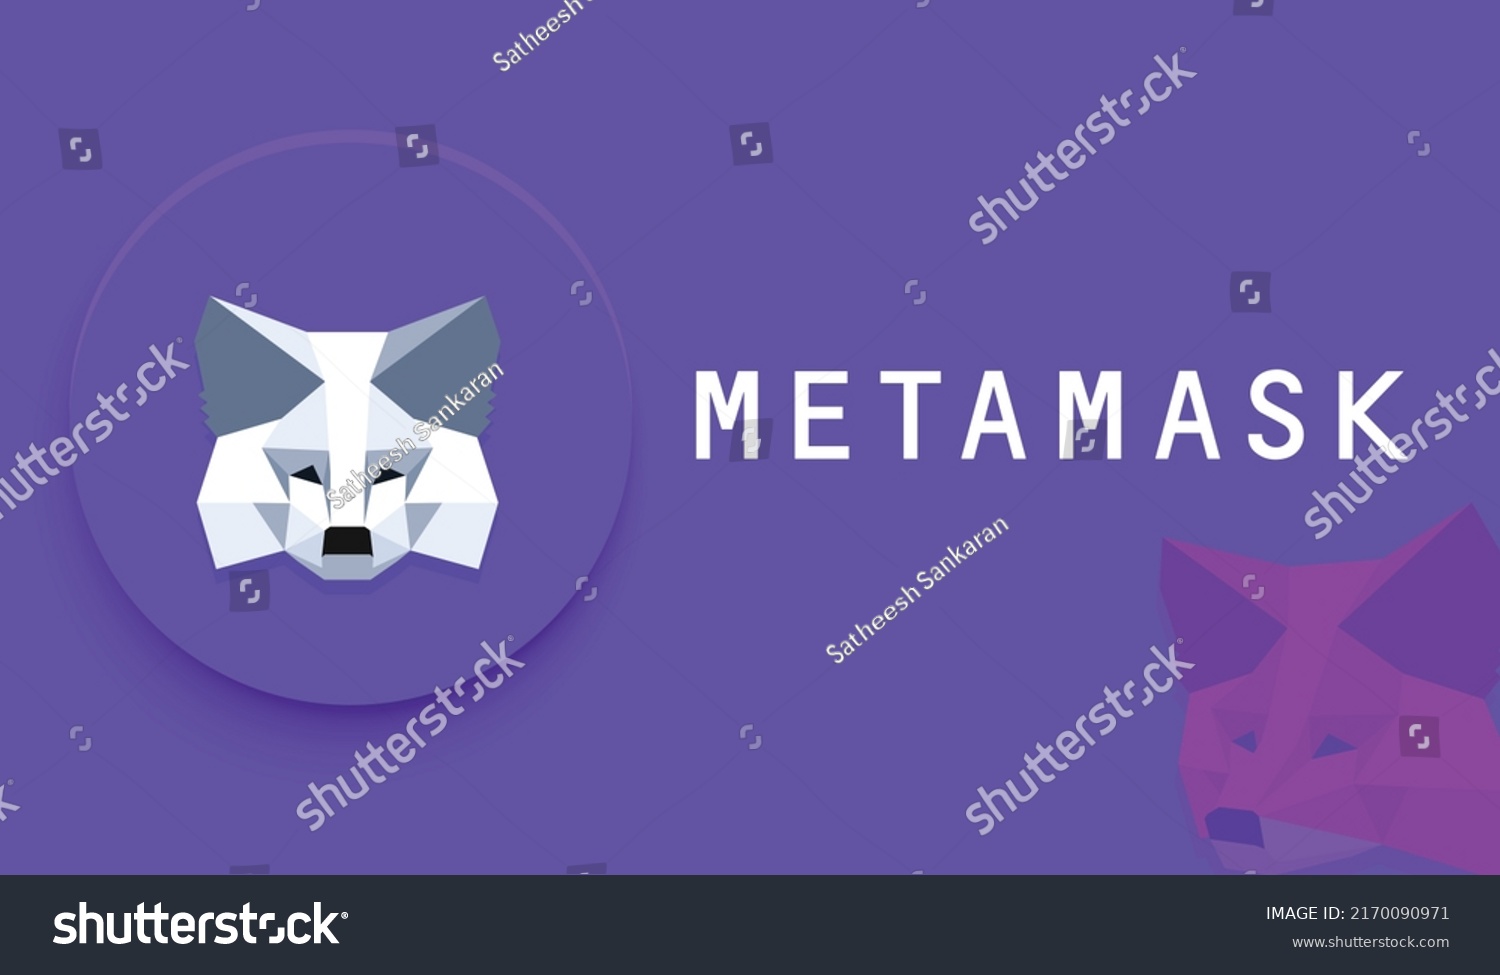 SVG of Metamask crypto currency exchange logo vector illustration background and banner template svg